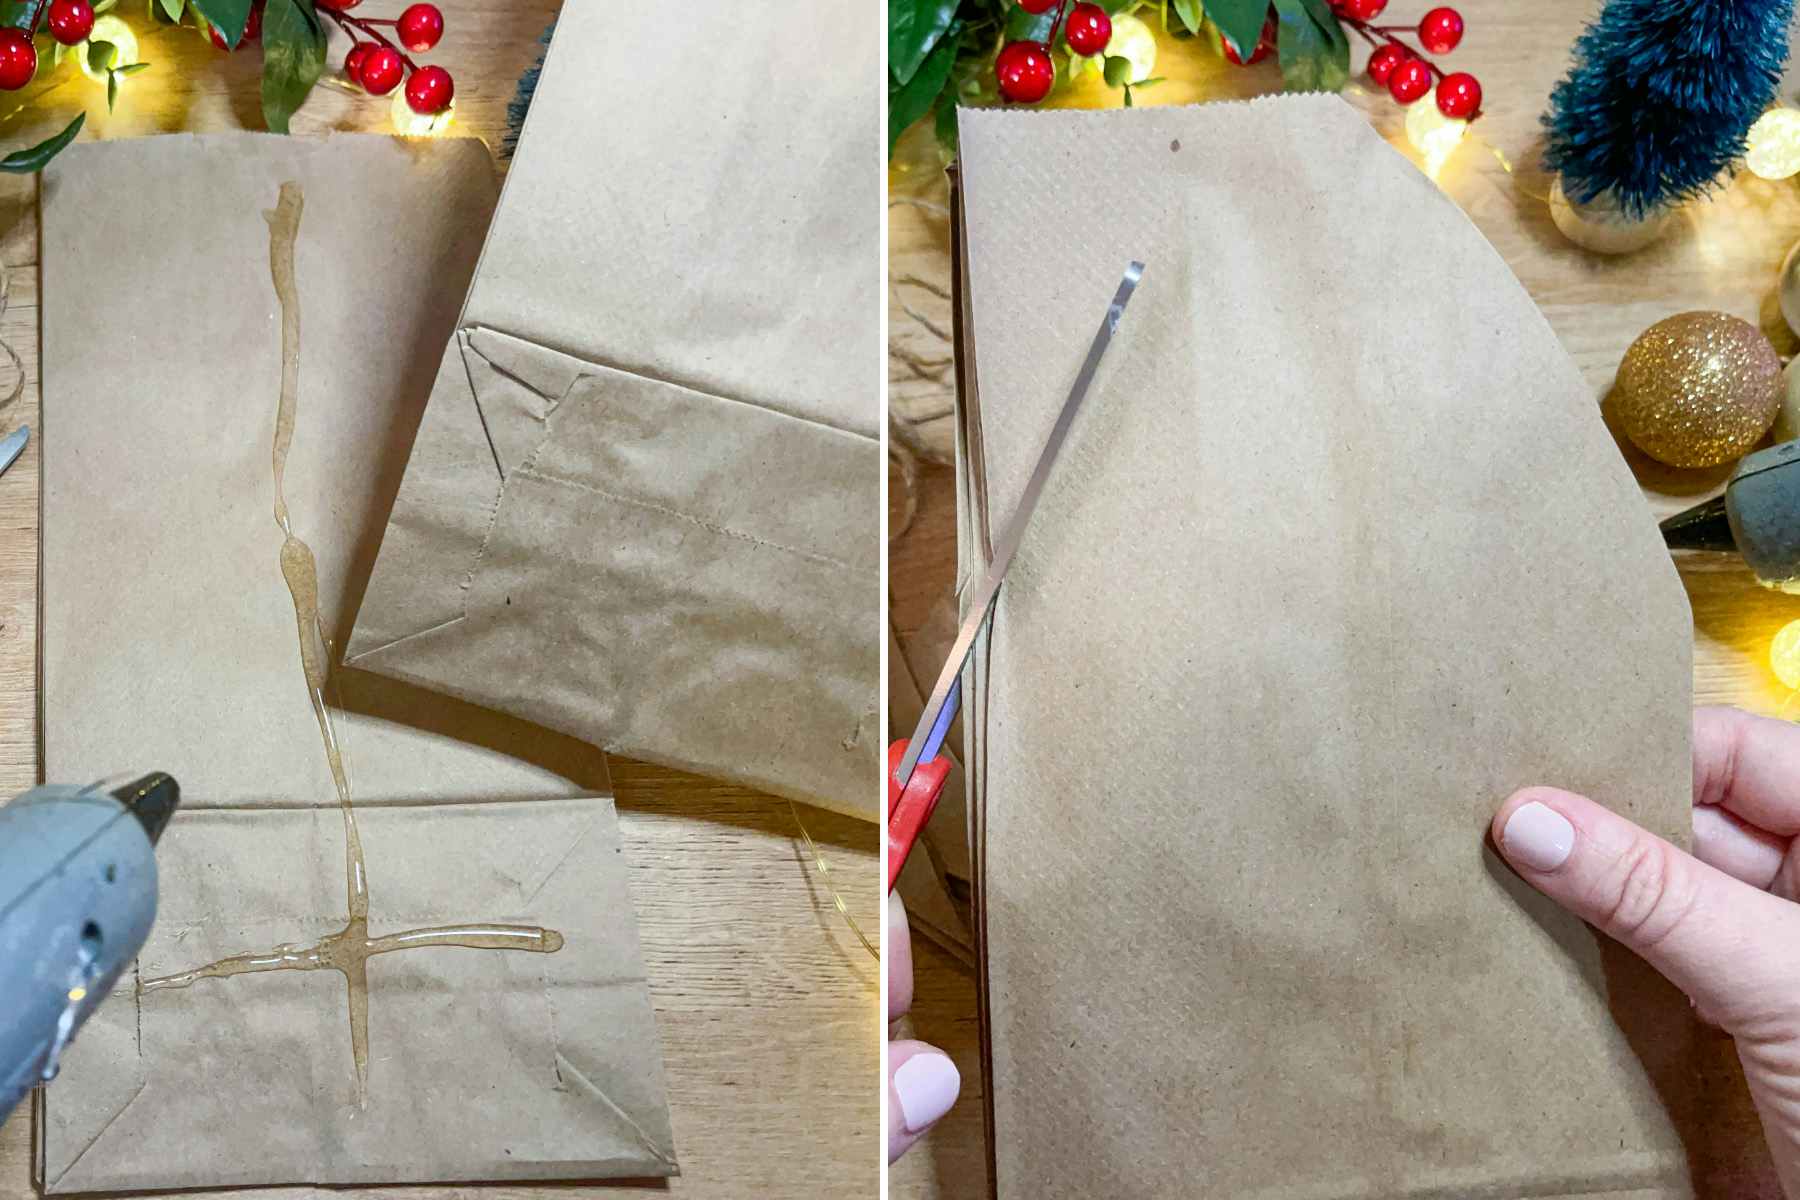 two side by side images of a person gluing bags together and cutting bags 